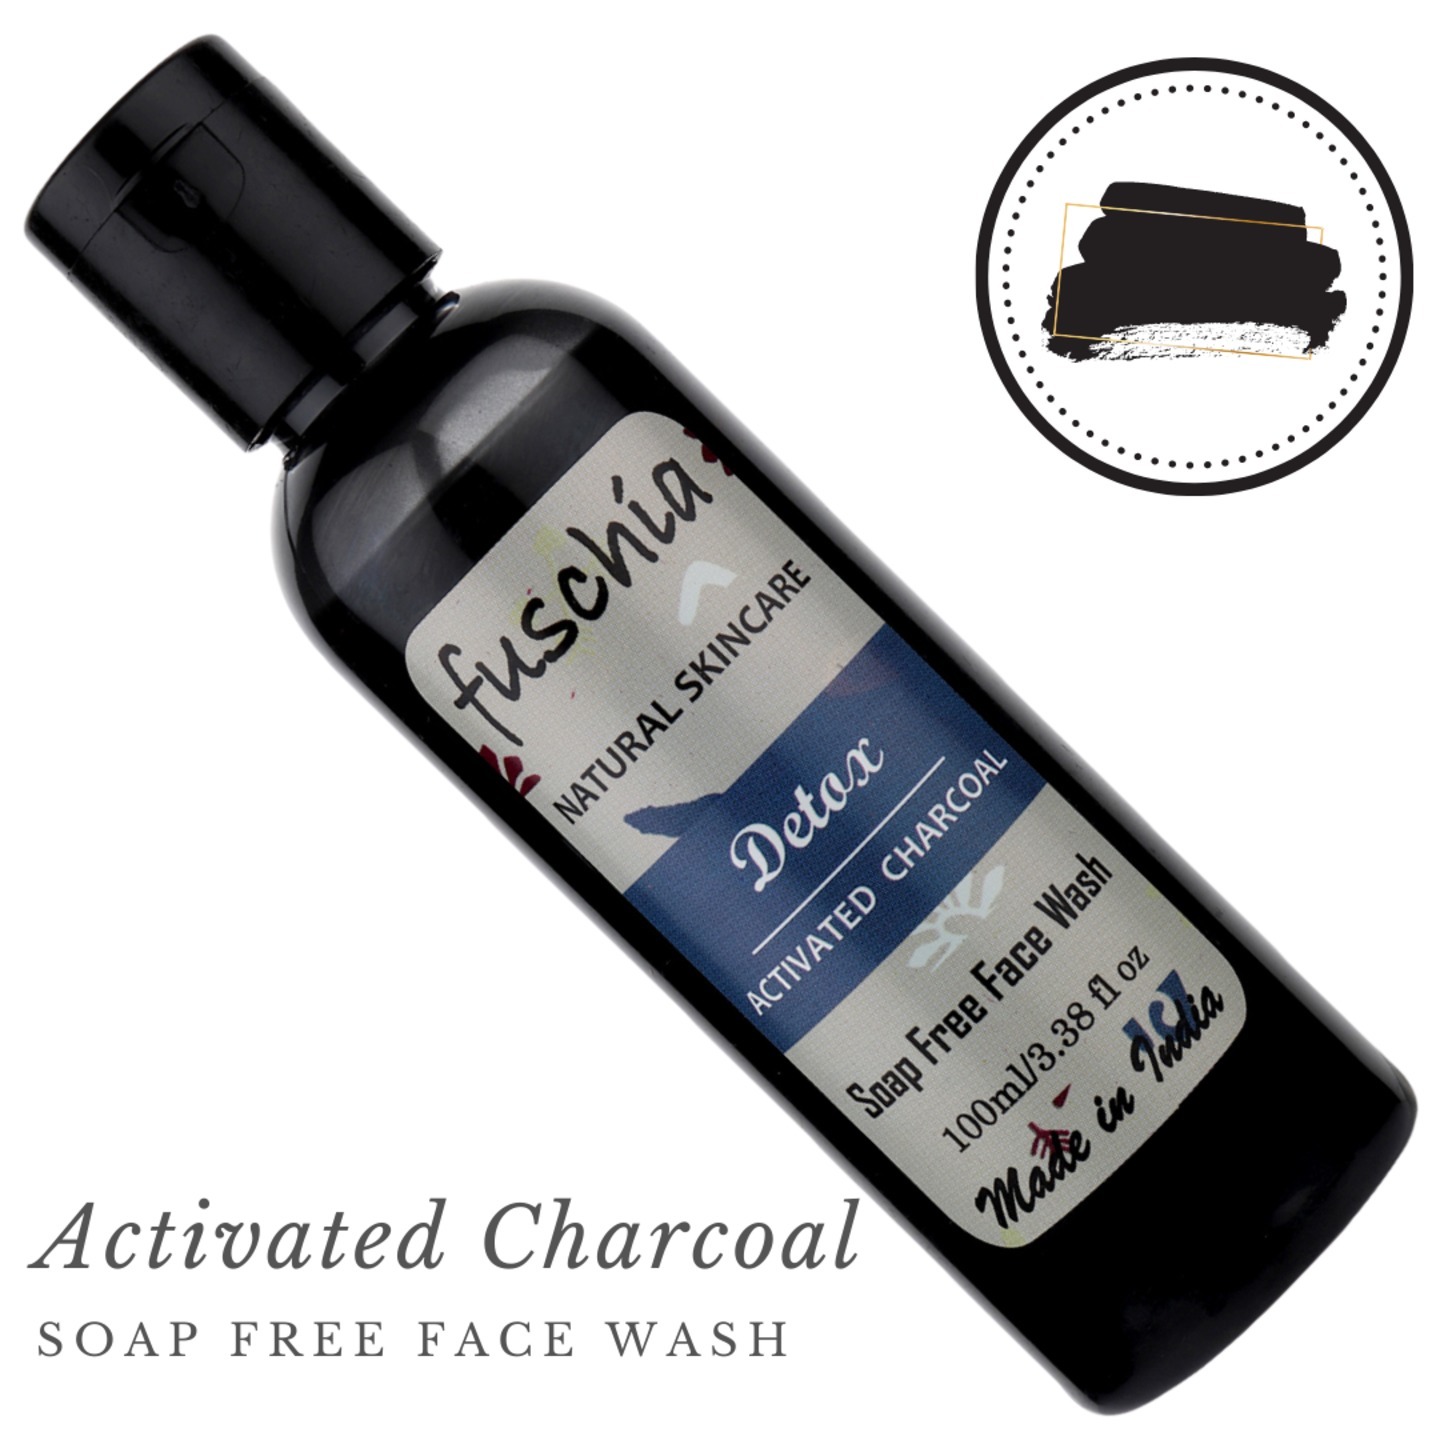 Fuschia Detox Activated Charcoal Soap Free Face Wash - 100ml